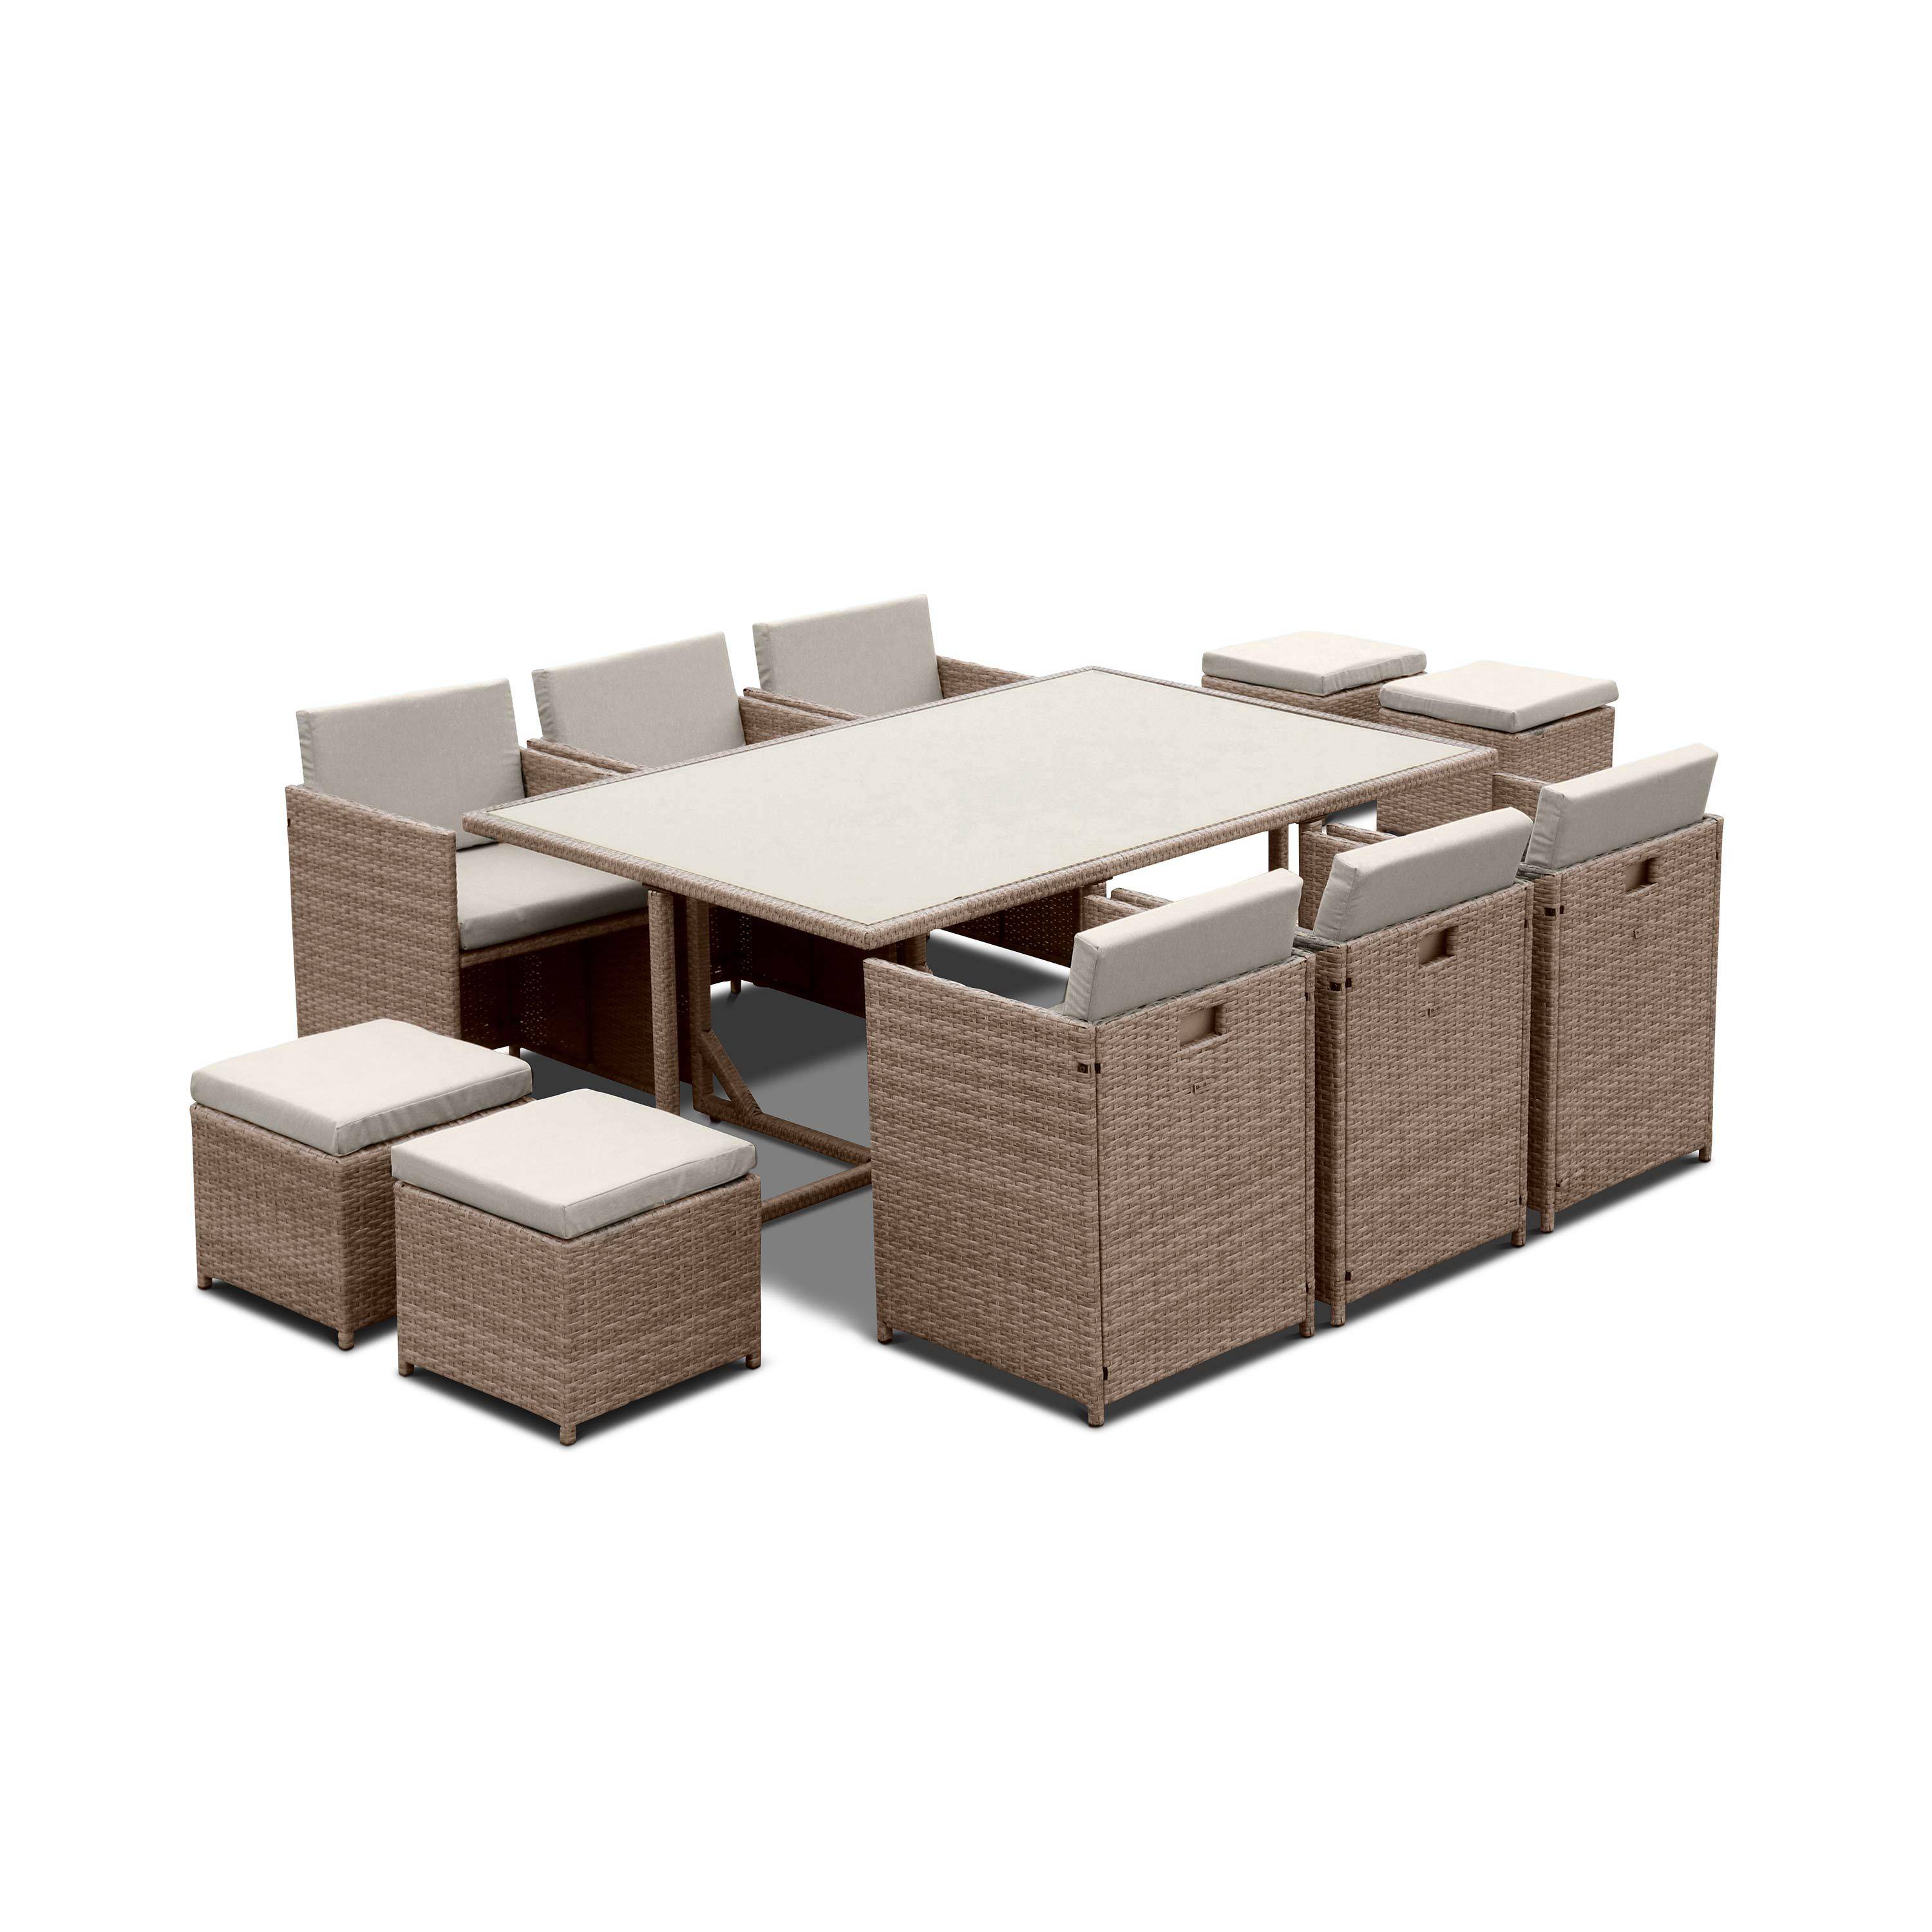 6 to 10-seater rattan cube table set - table, 6 armchairs, 2 footstools - Vabo 10 - Beige rattan, Beige cushions,sweeek,Photo2